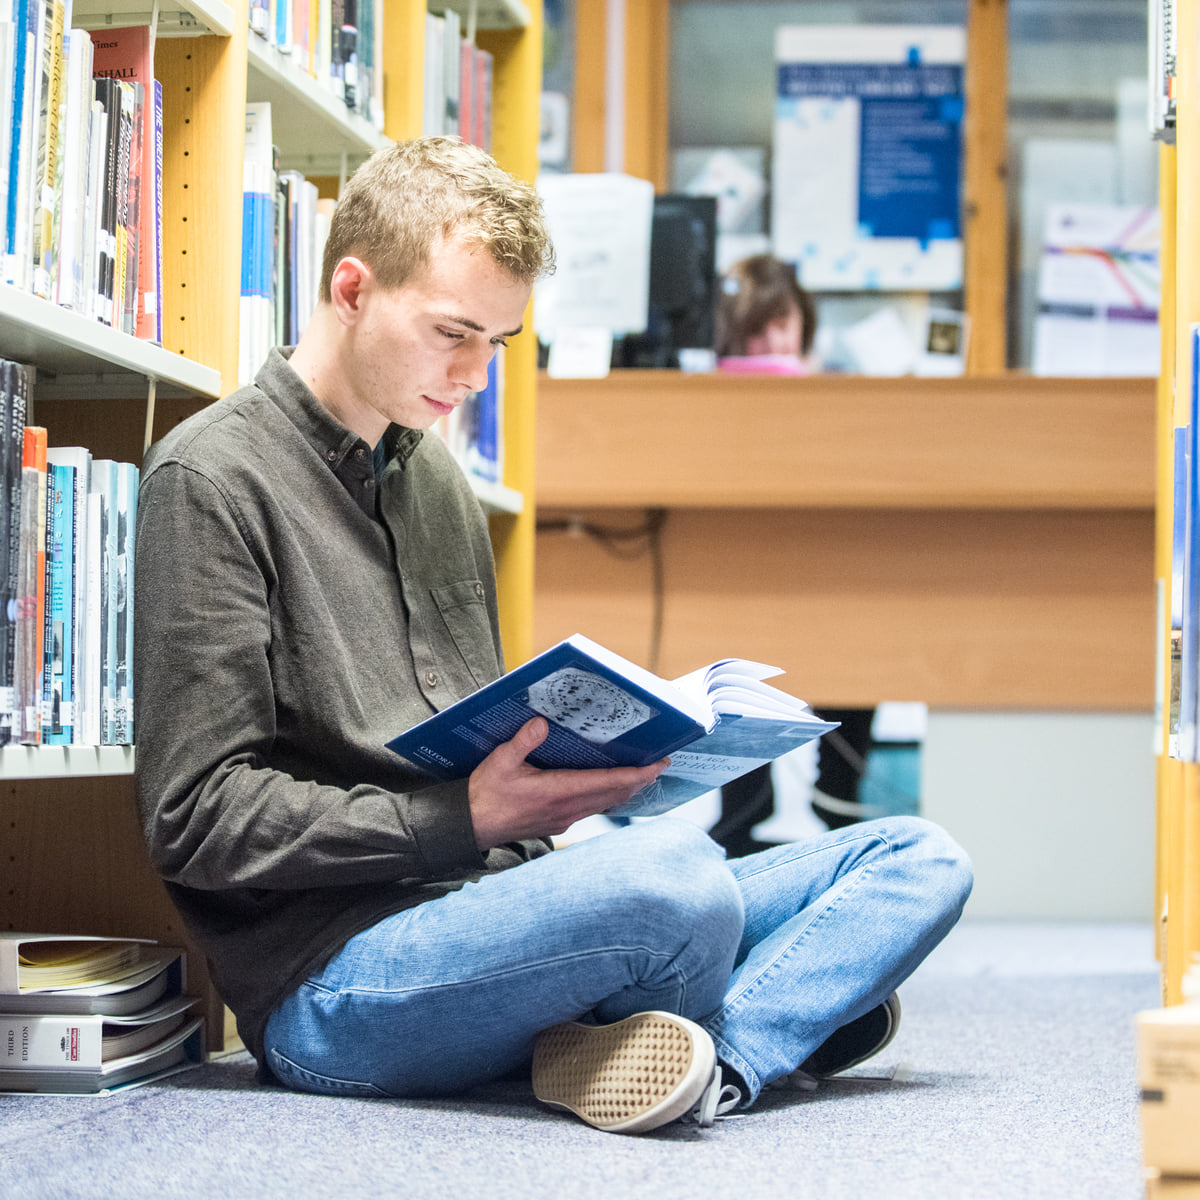 A student sitting on the floor in library reading a book